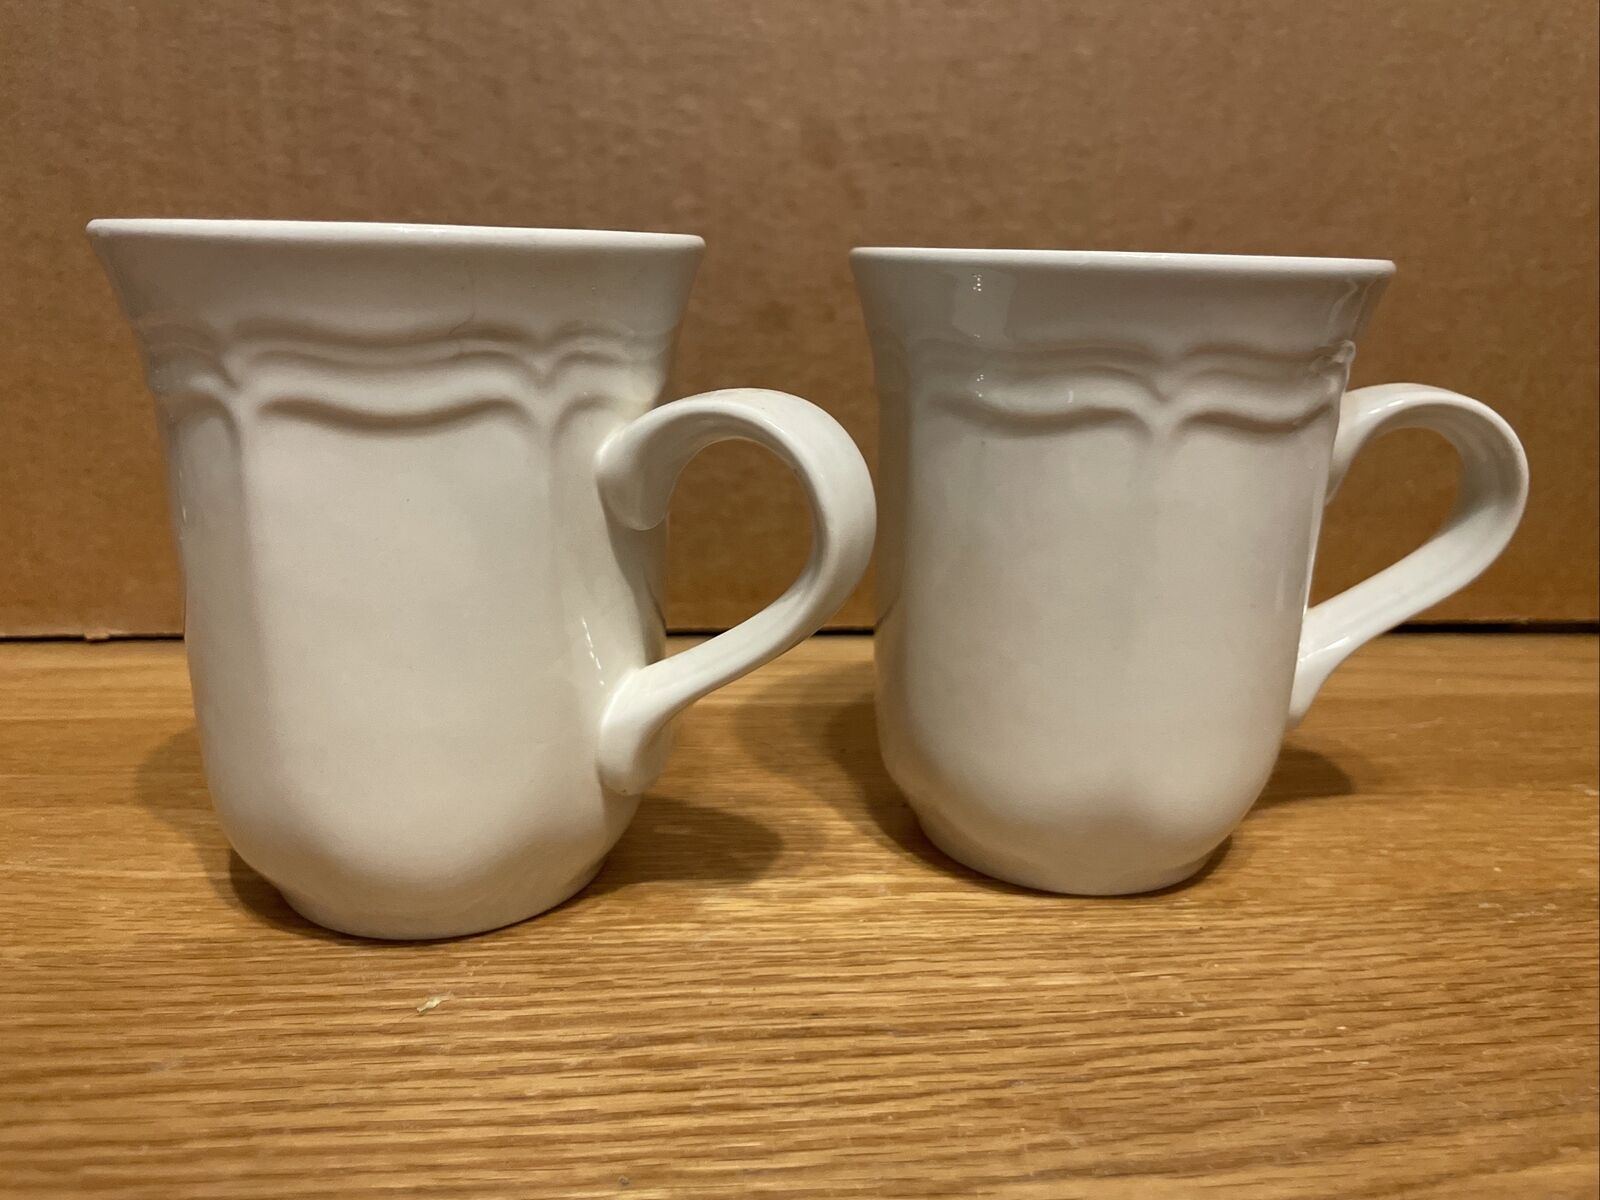 Lot of 2 Mikasa French Countryside Coffee Cups F9000 Mugs or Tea Cups